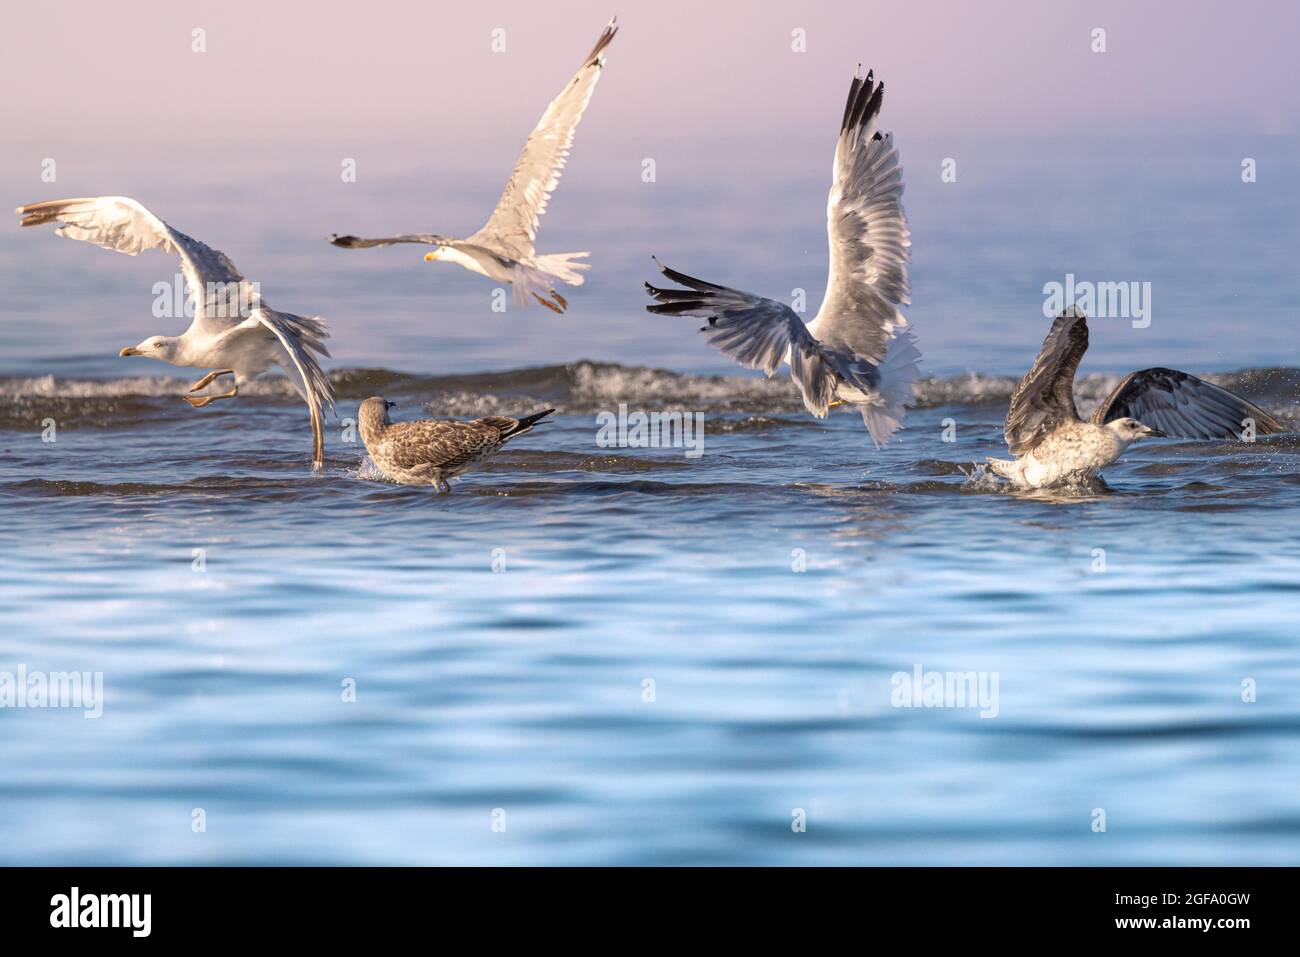 Close up of a flock of seagulls taking off from shallow water in the late afternoon light Stock Photo